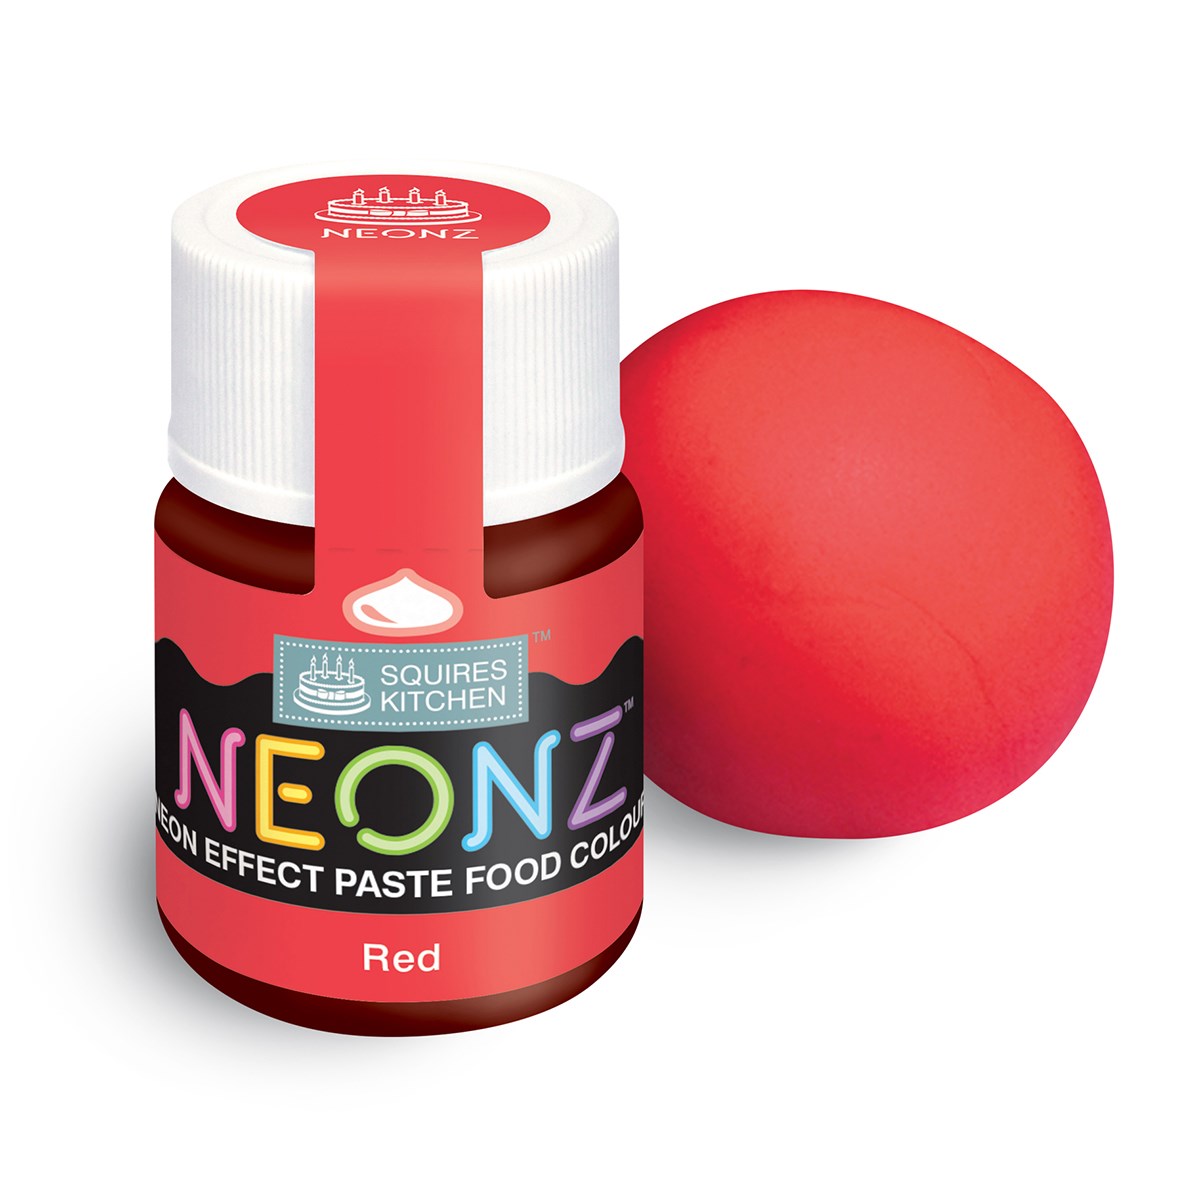 Squires Kitchen Neonz Neon Effect Concentrated Paste Food Colouring - 20g - Red